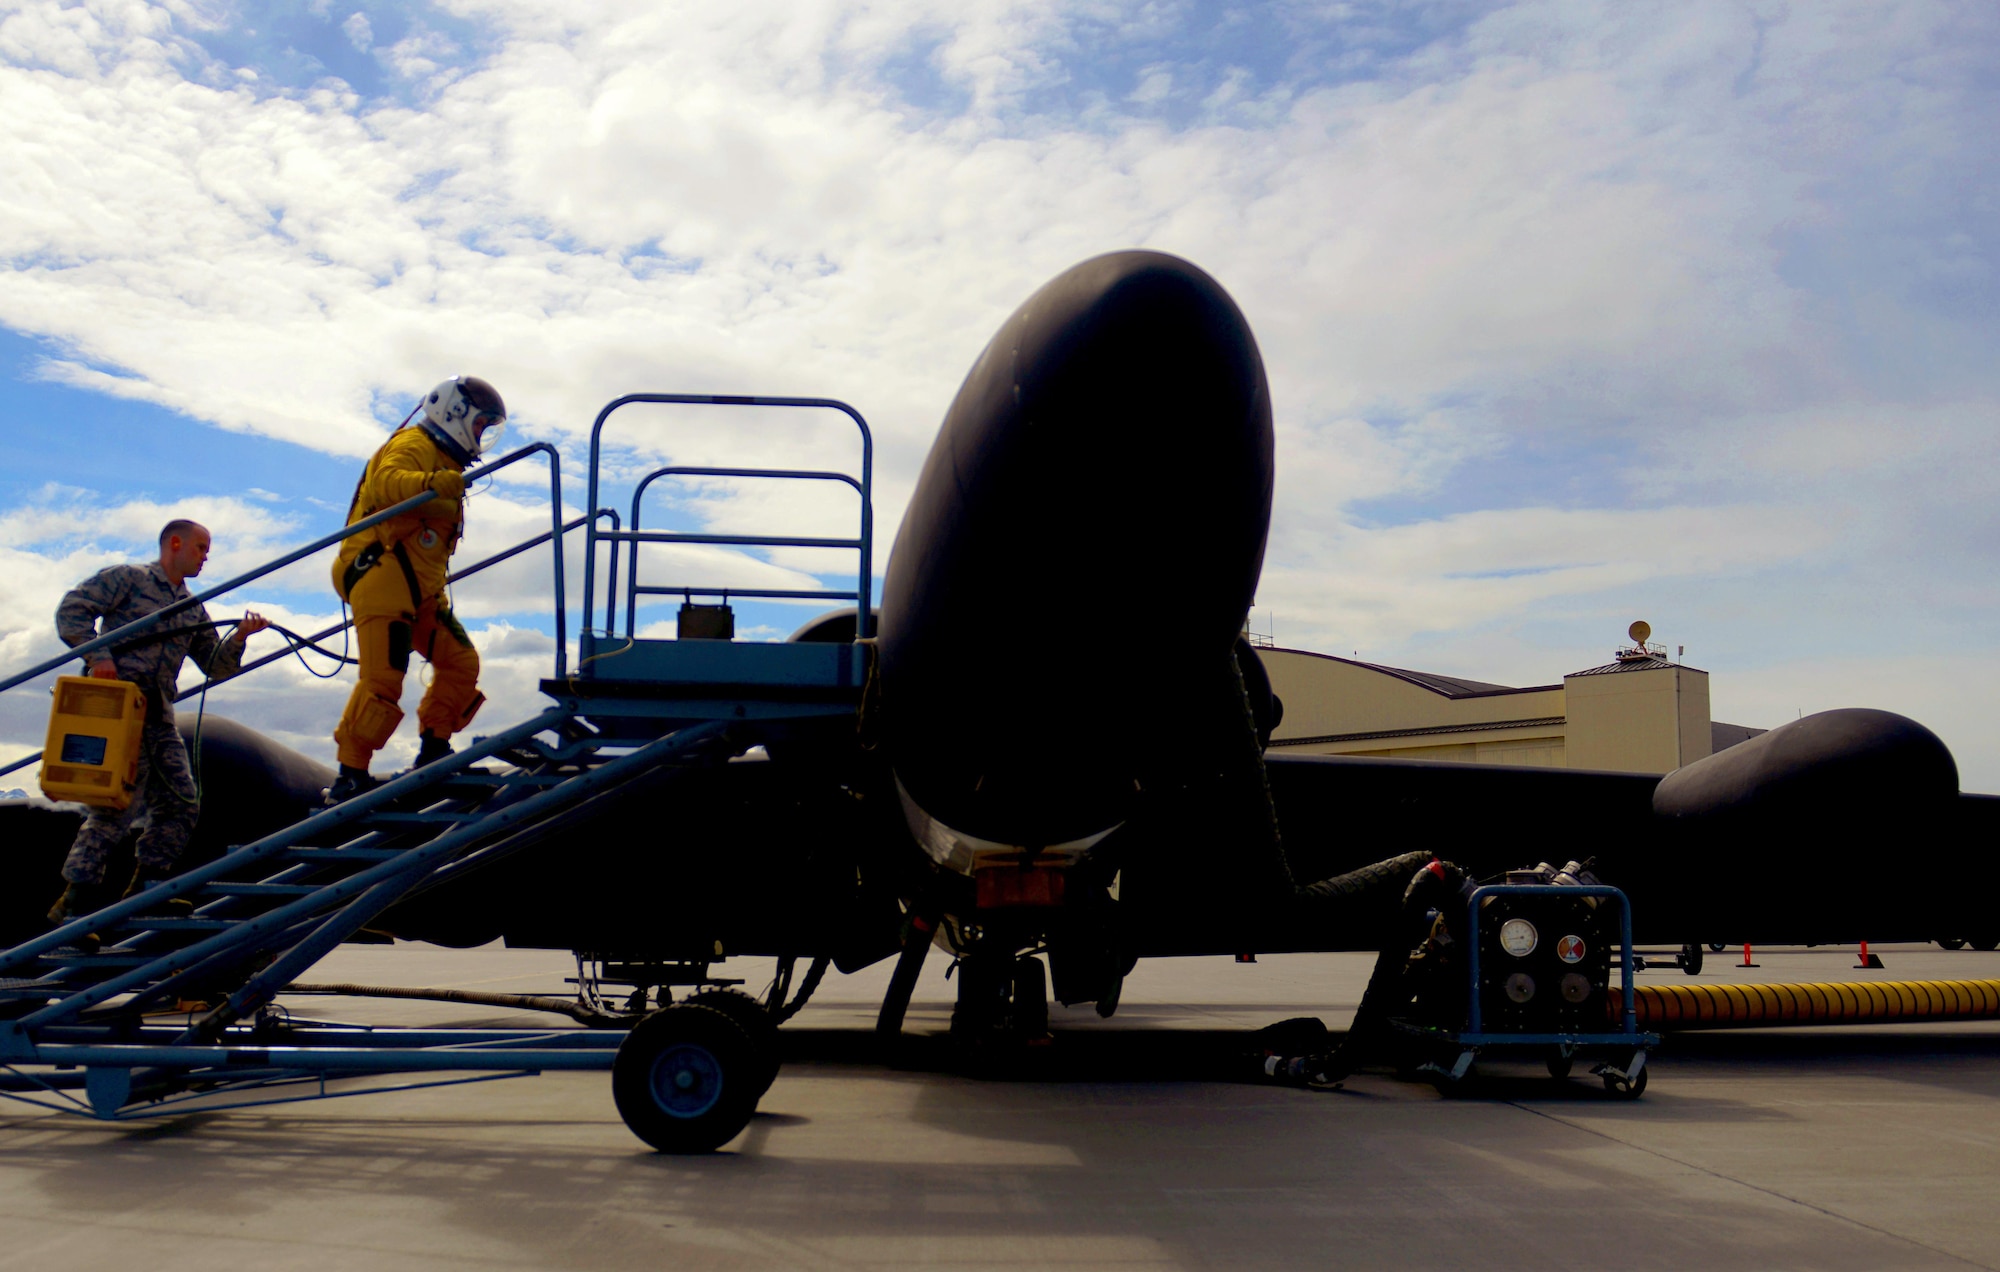 A U-2 Dragon Lady pilot climbs to the cockpit during exercise Northern Edge 17 at Joint Base at Joint Base Elmendorf-Richardson, Alaska, May 9, 2017. Northern Edge is a biennial joint training exercise involving approximately 6,000 personnel and 200 fixed-wing aircraft, and dates back to 1975. (U.S. Air Force photo/Staff Sgt. Jeffrey Schultze)